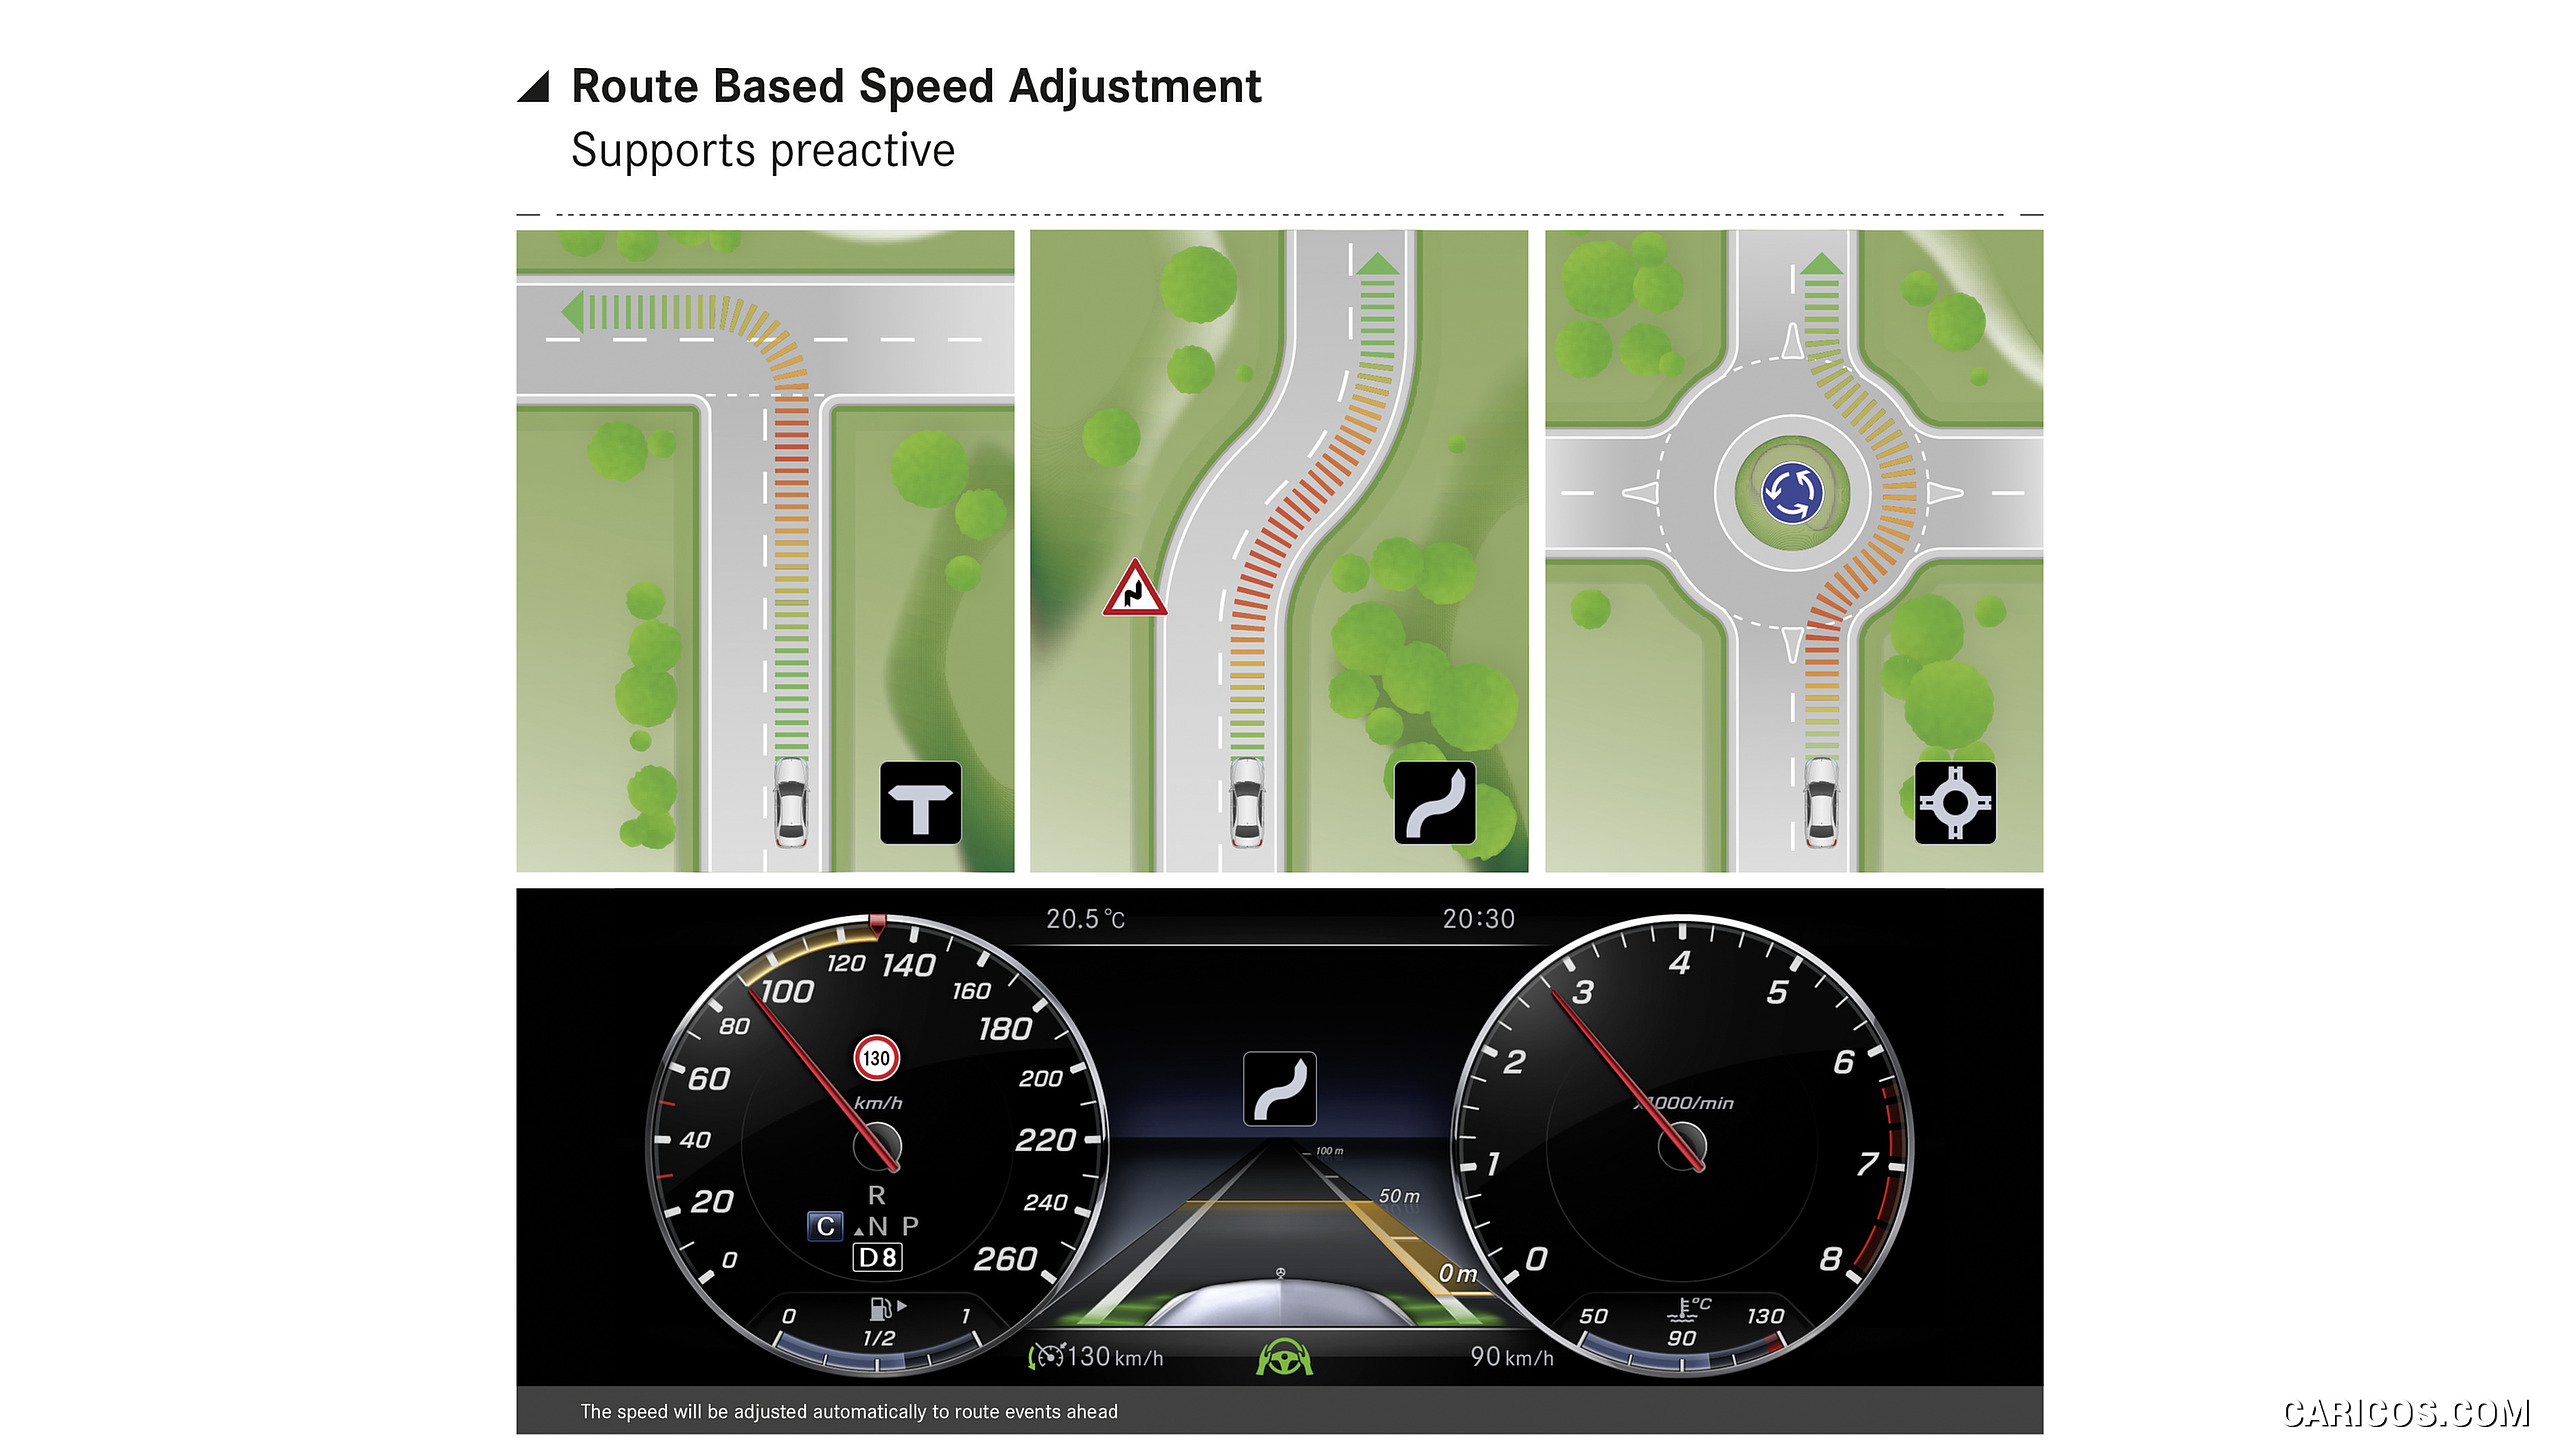 2018 Mercedes-Benz S-Class - Route Based Speed Adjustment, #32 of 156